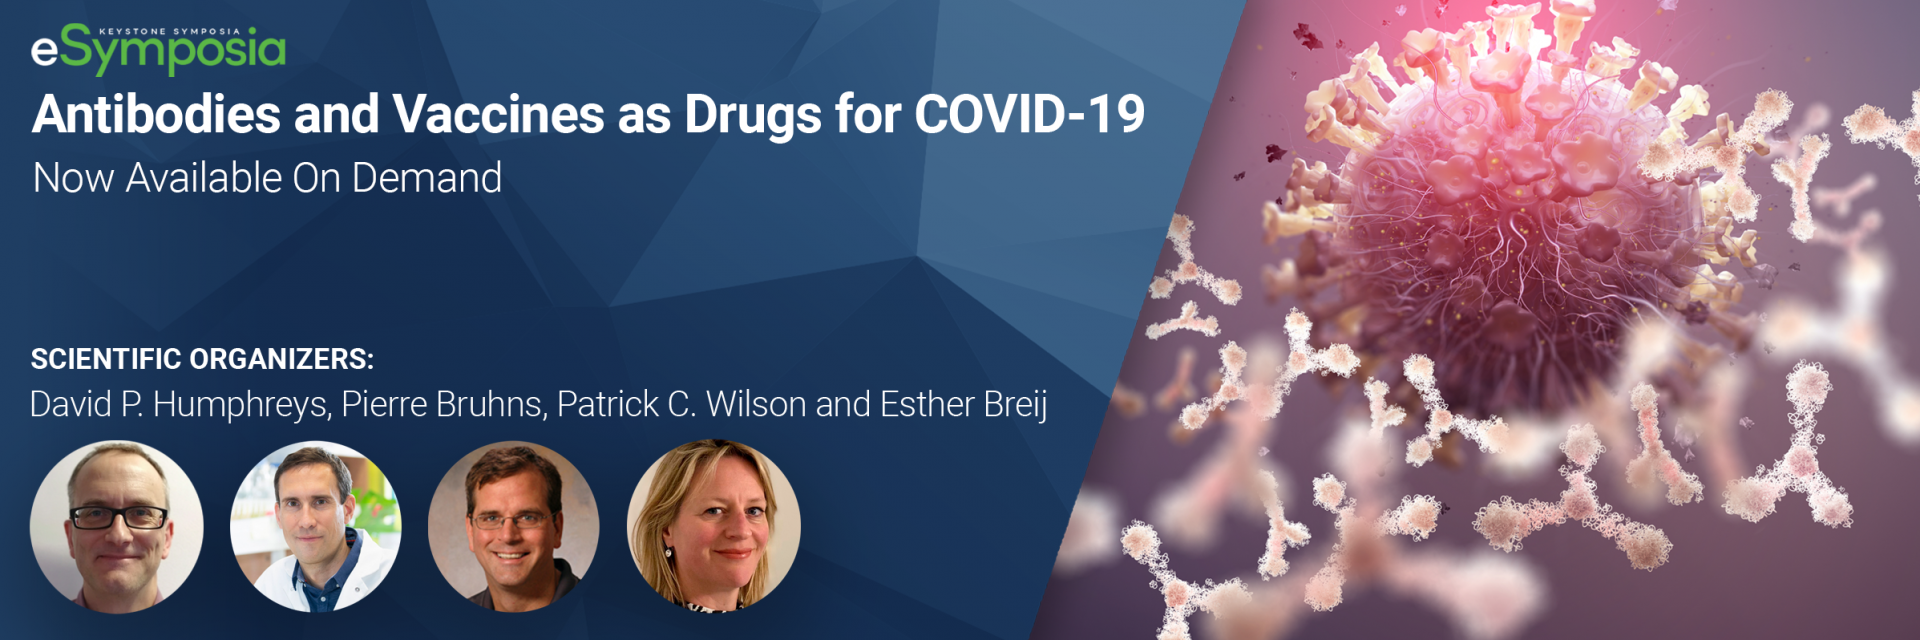 Antibodies and Vaccines as Drugs for COVID-19